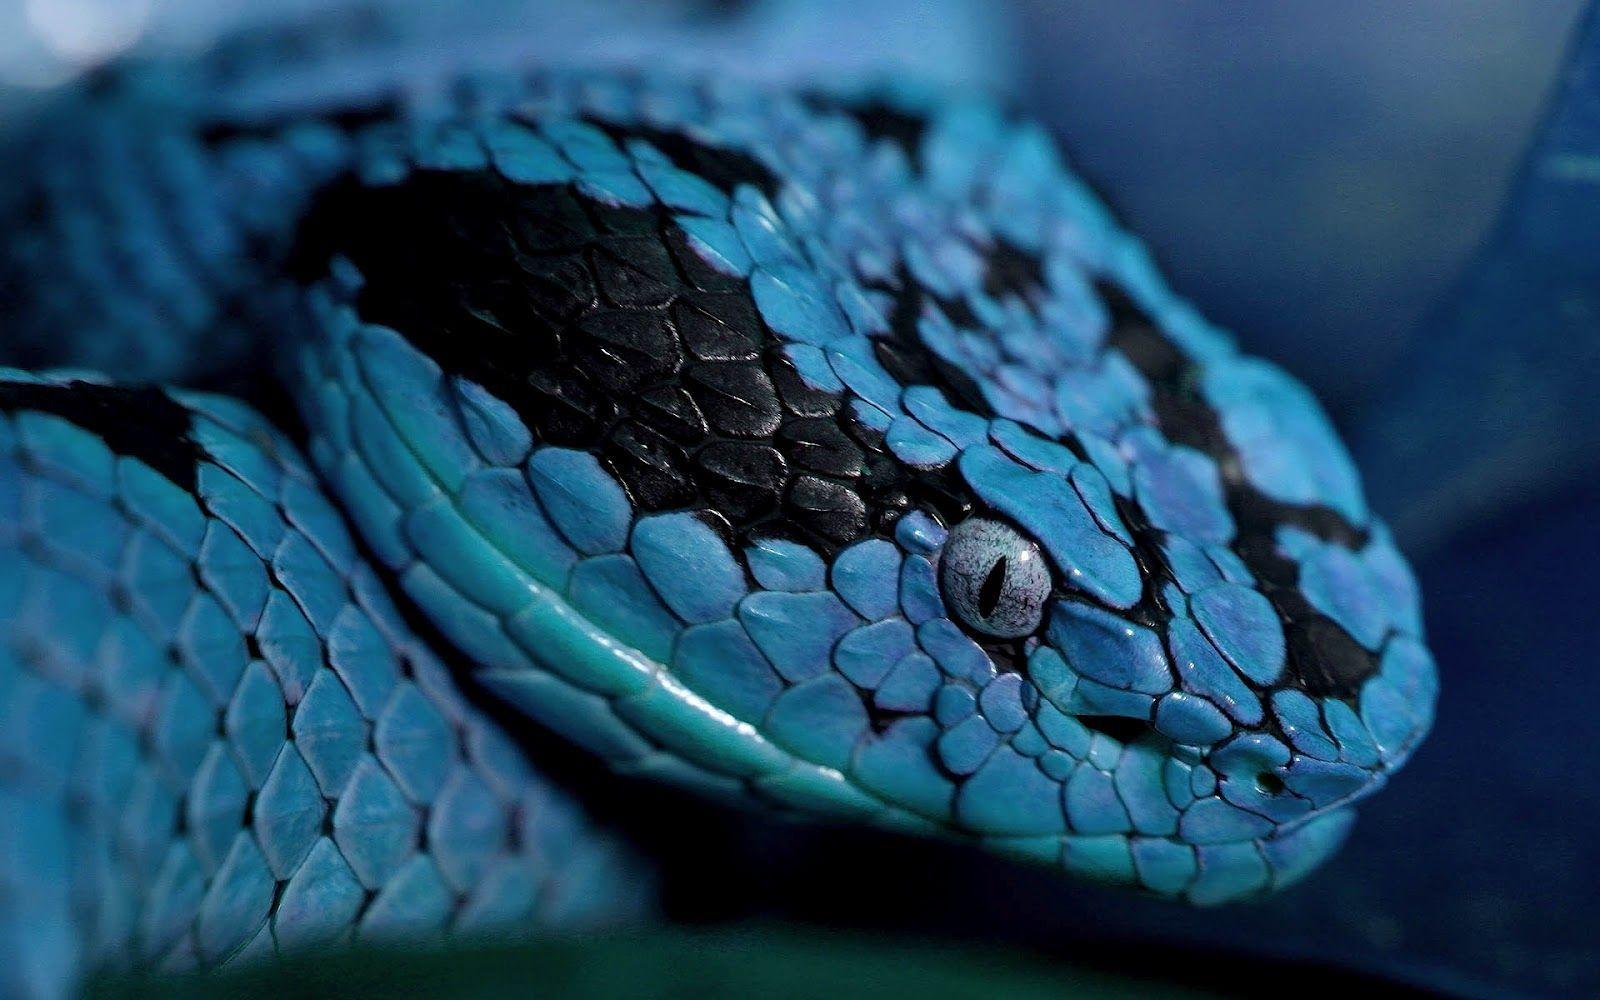 pics of snakes. Close up photo of a blue snake. HD snakes